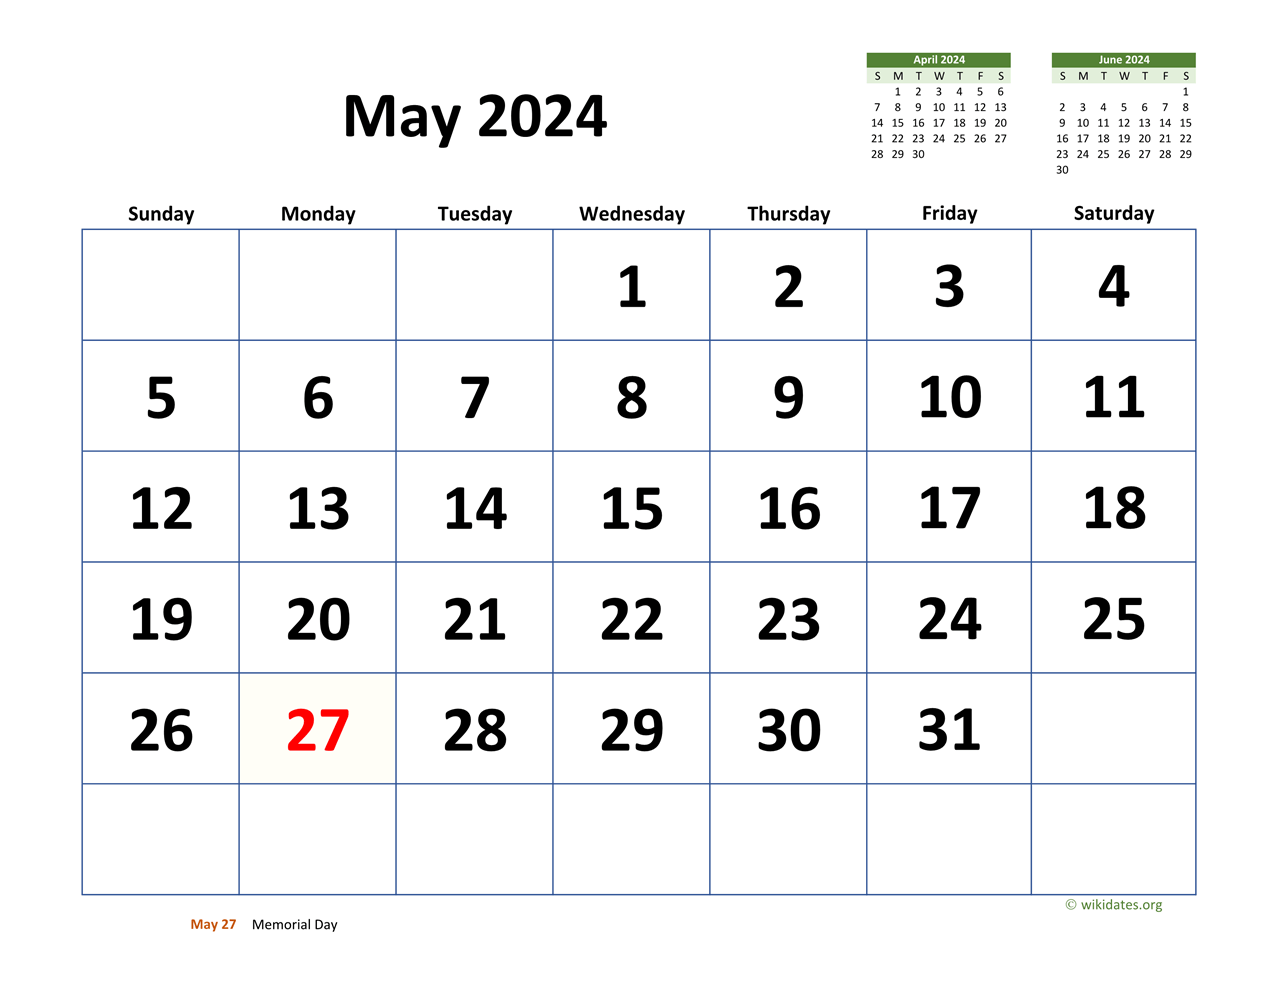 May 2024 Calendar with Extralarge Dates